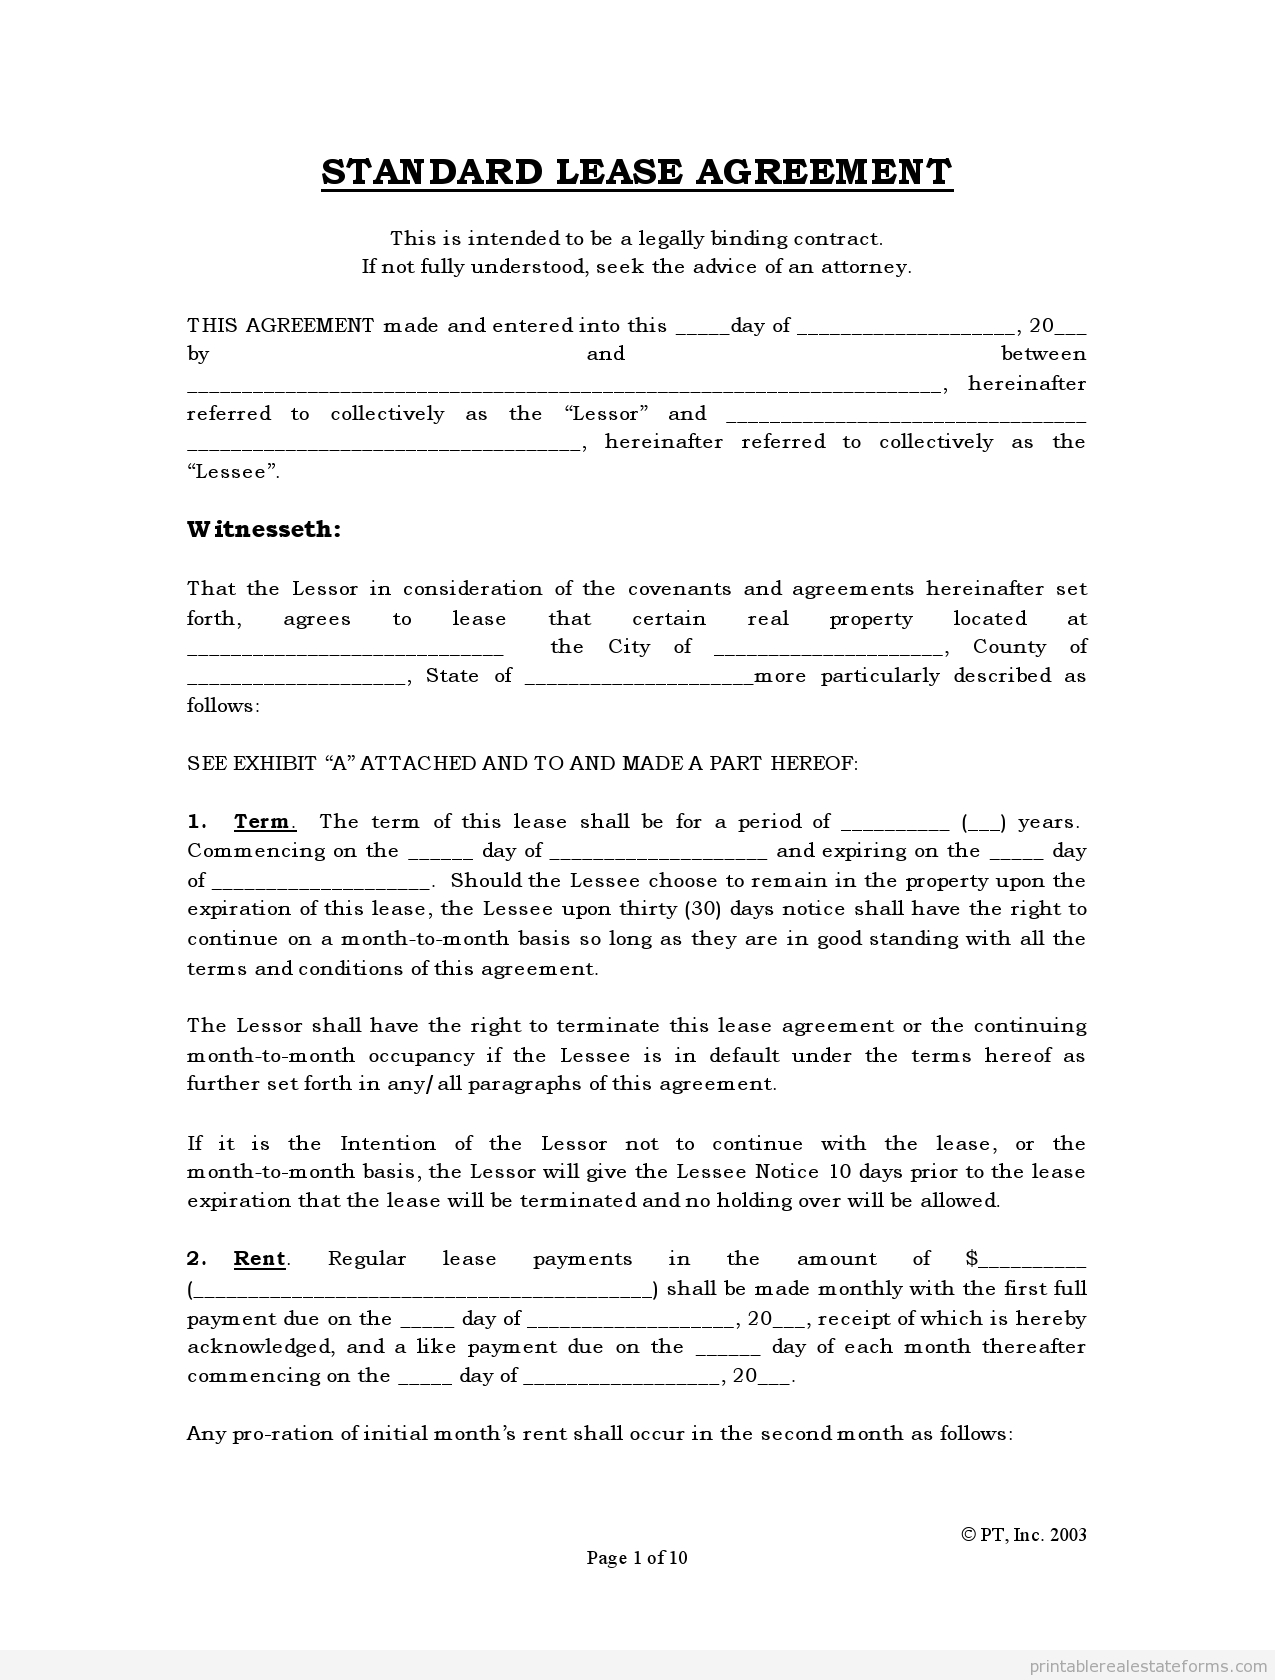 Free Rental Agreements To Print | Free Standard Lease Agreement Form - Free Printable Real Estate Forms